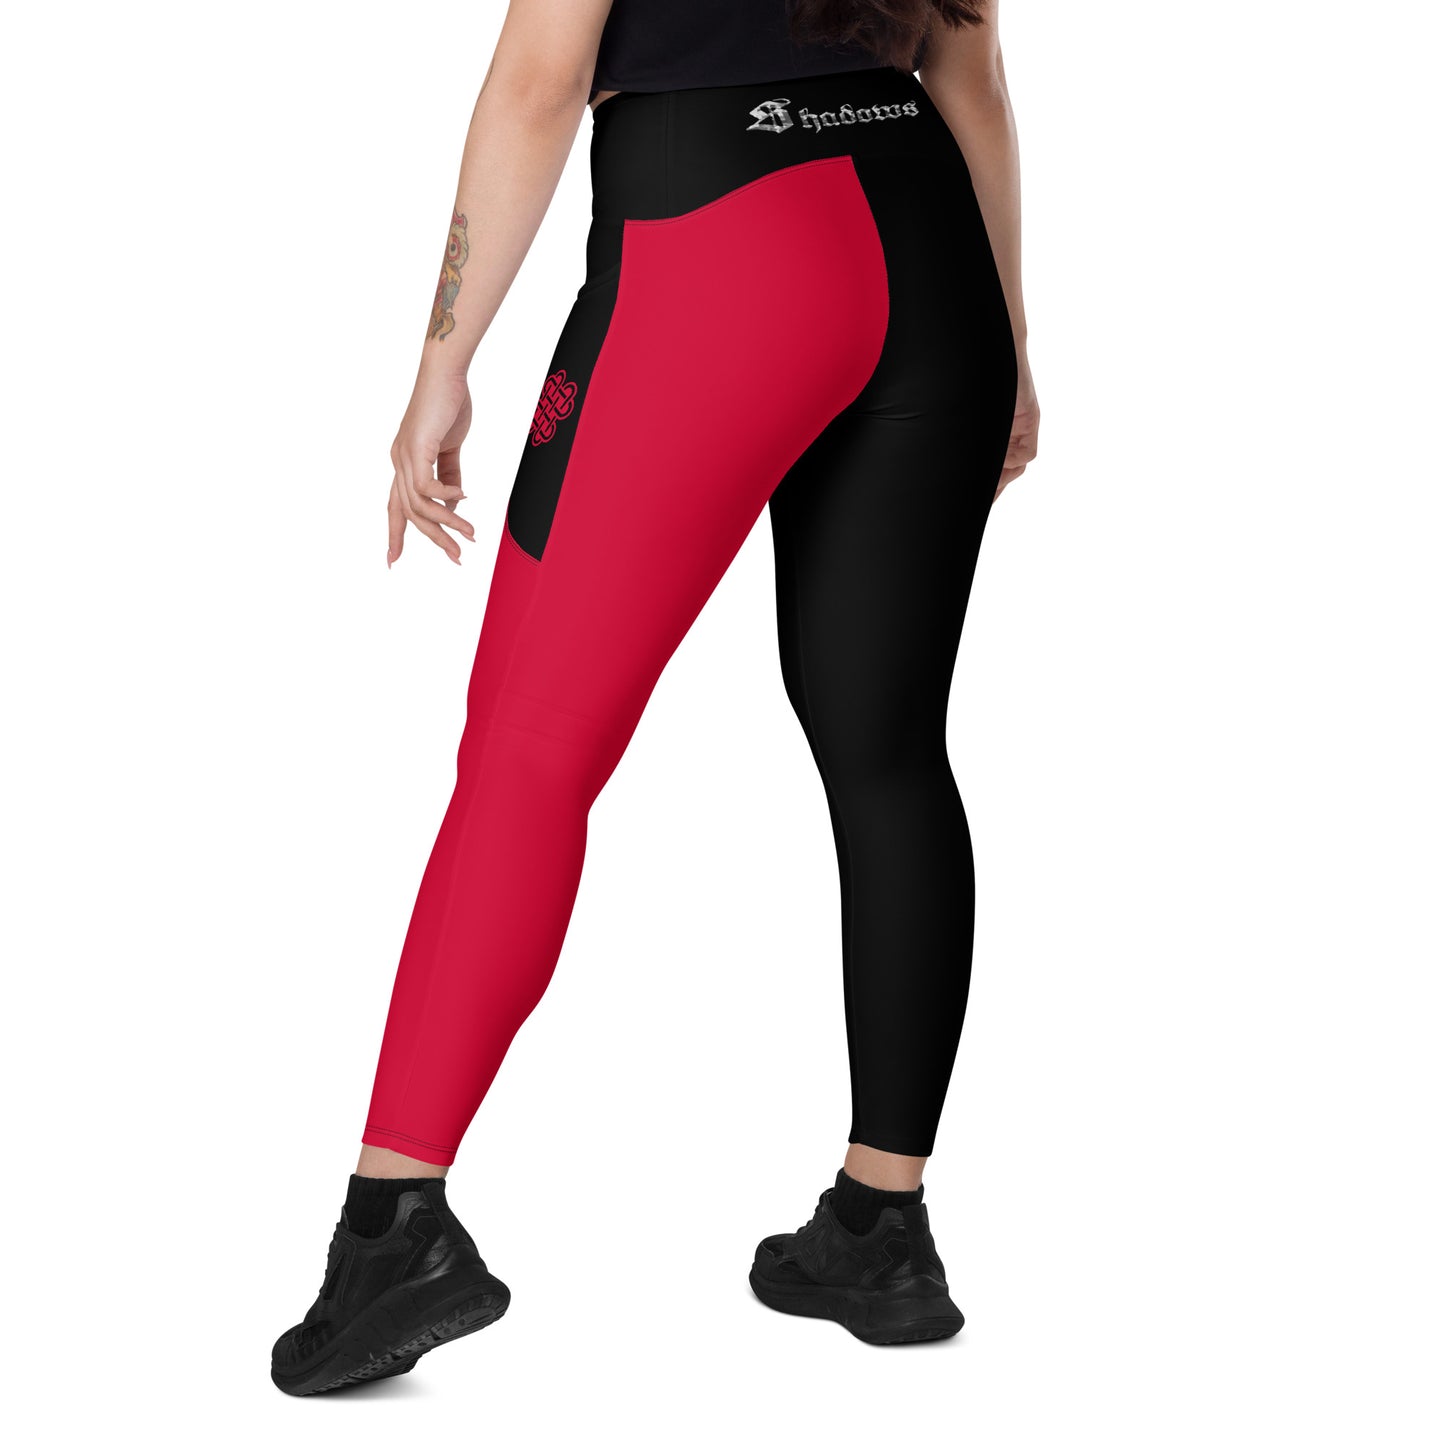 Shadows One leg Leggings with pockets Red